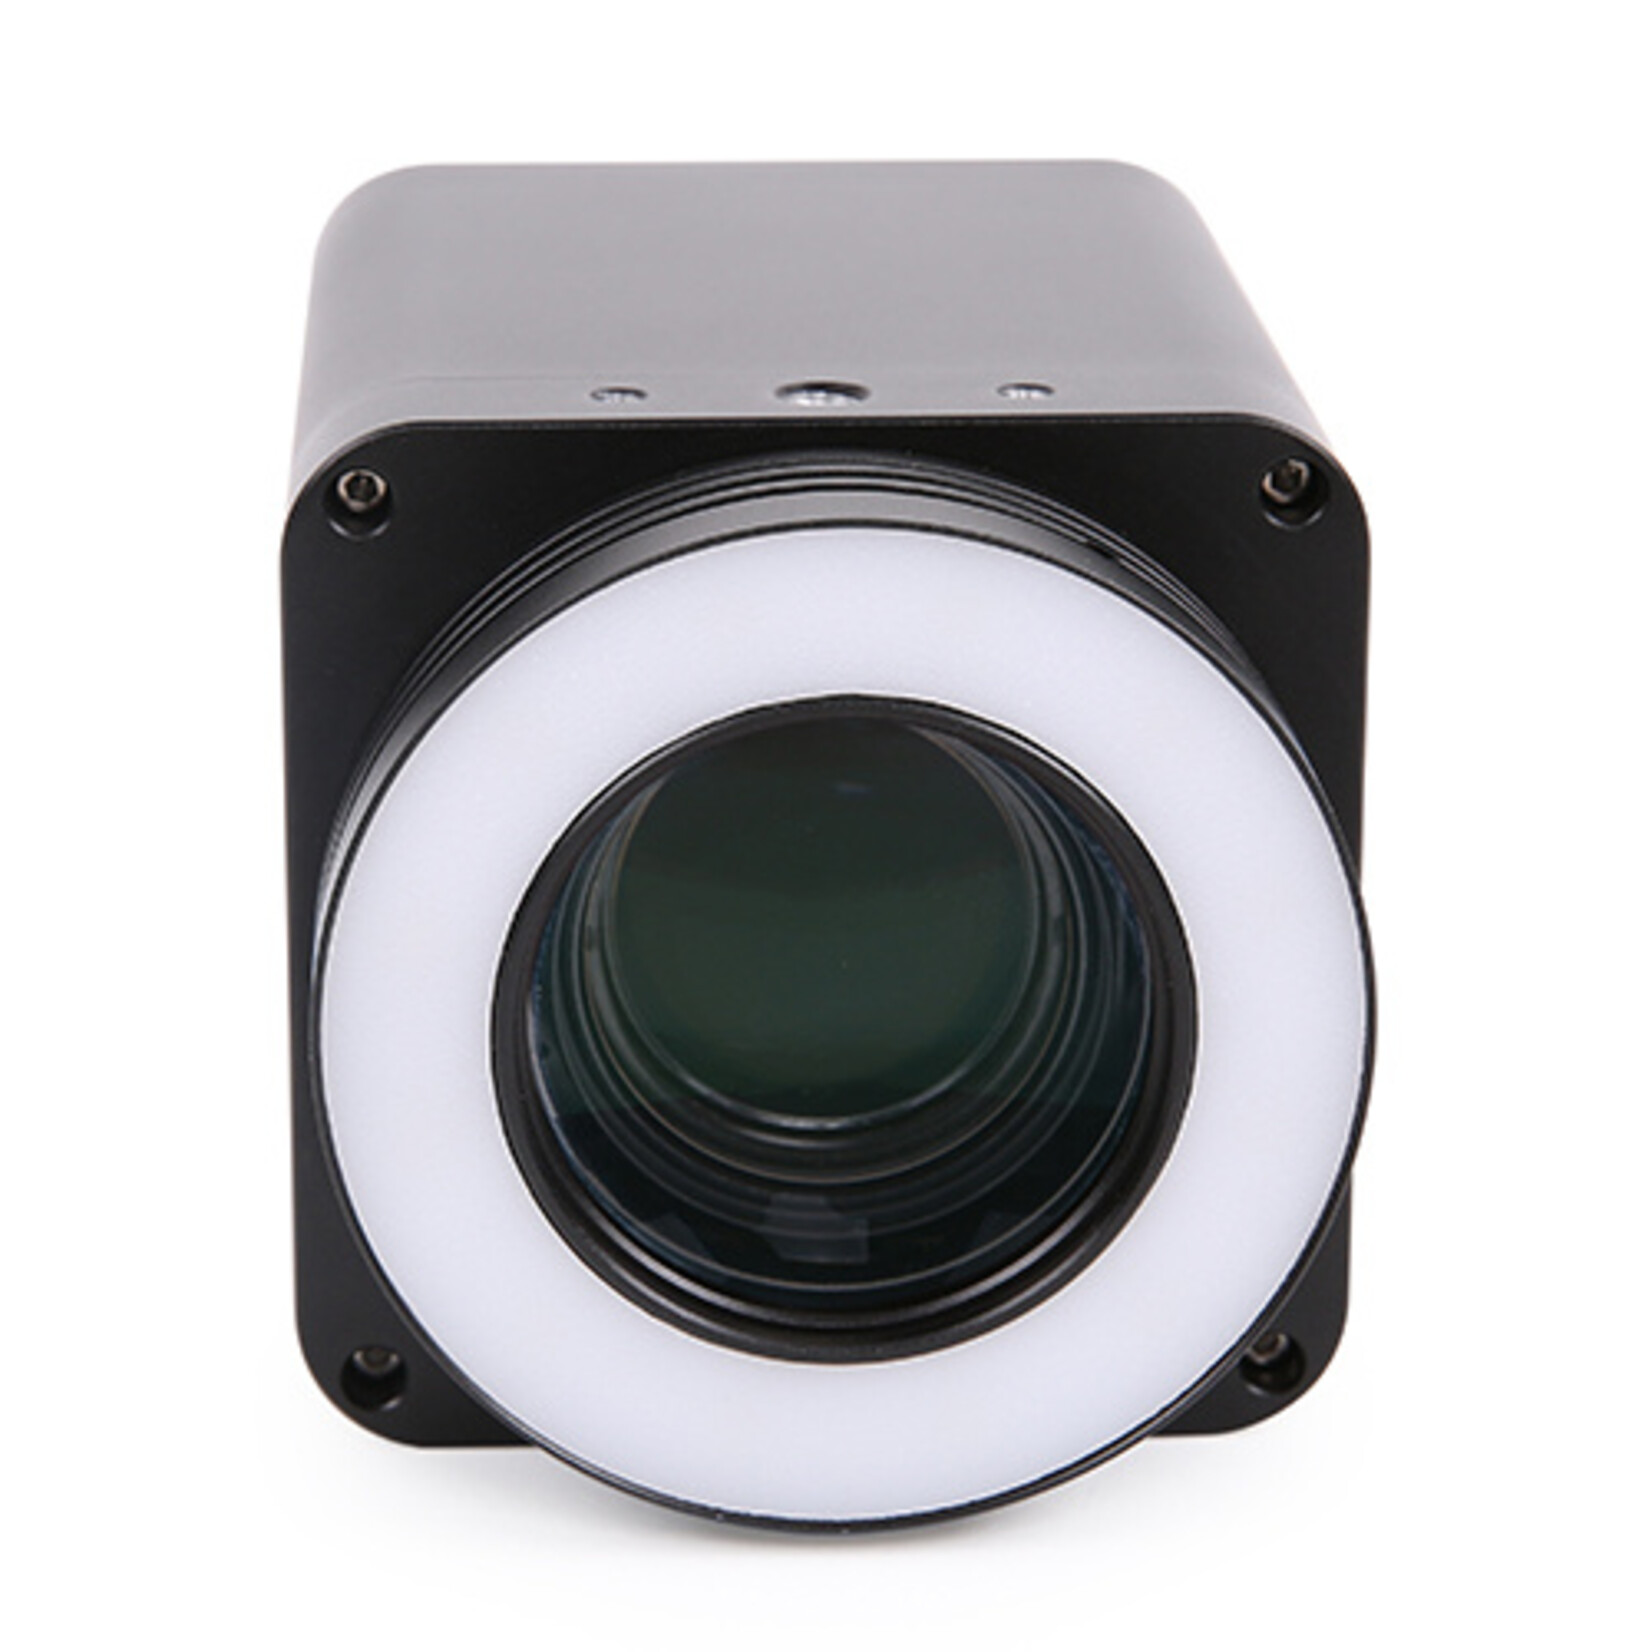 HDMI camera with integrated optics and LED lighting